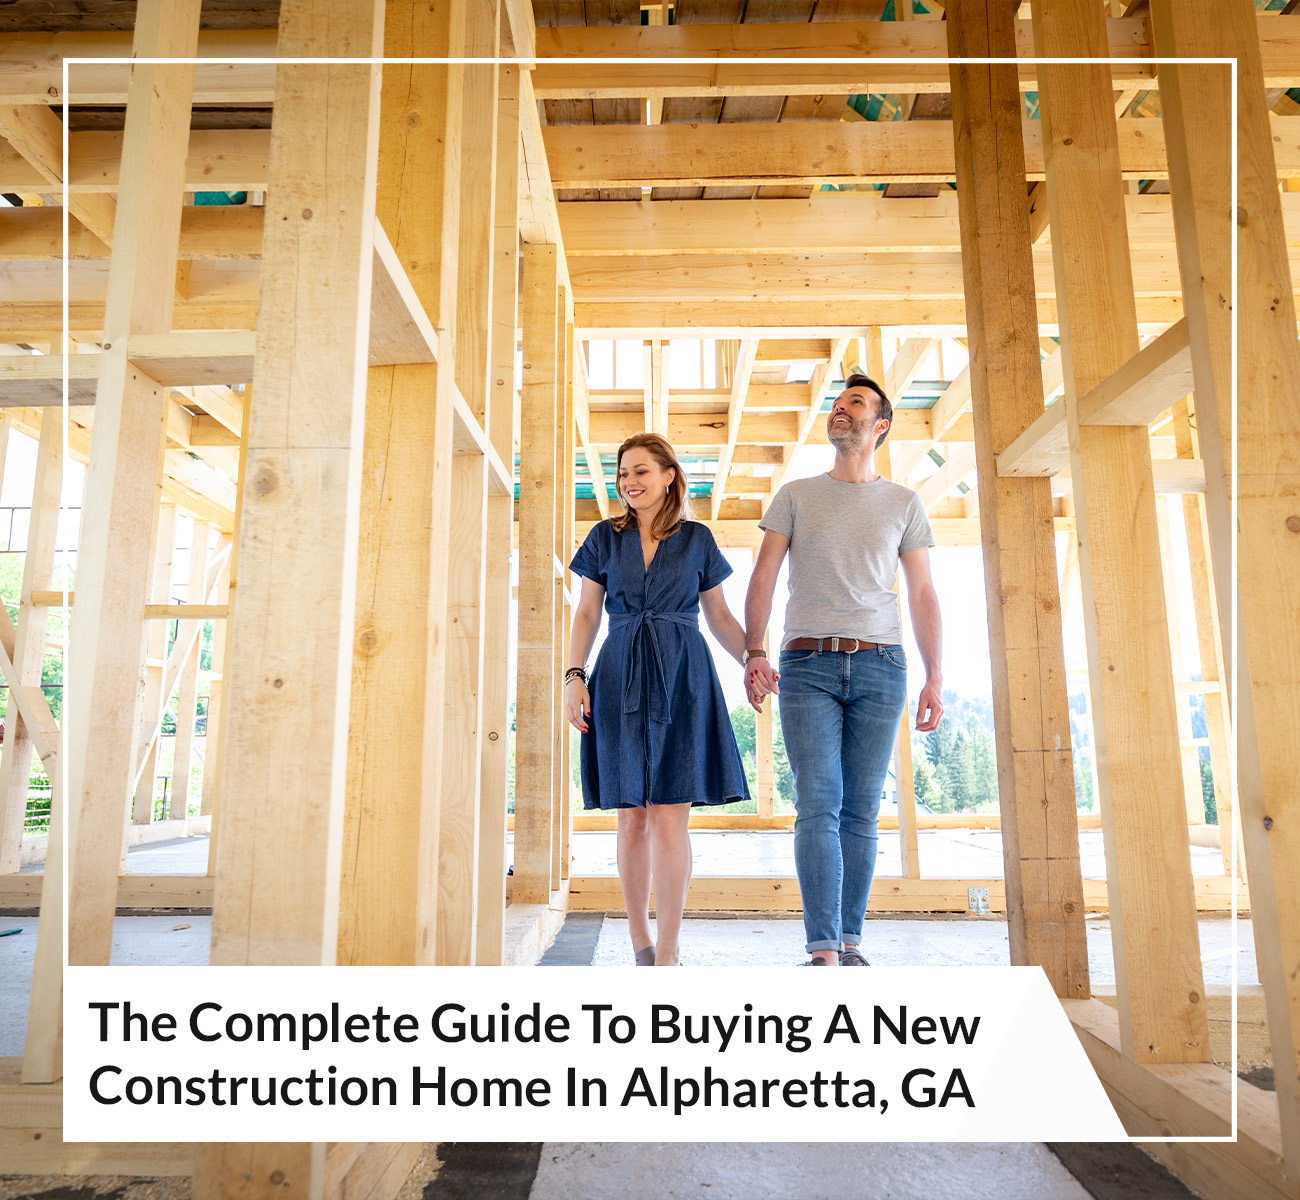 How to Buy a New Construction Home: A Guide for Beginners